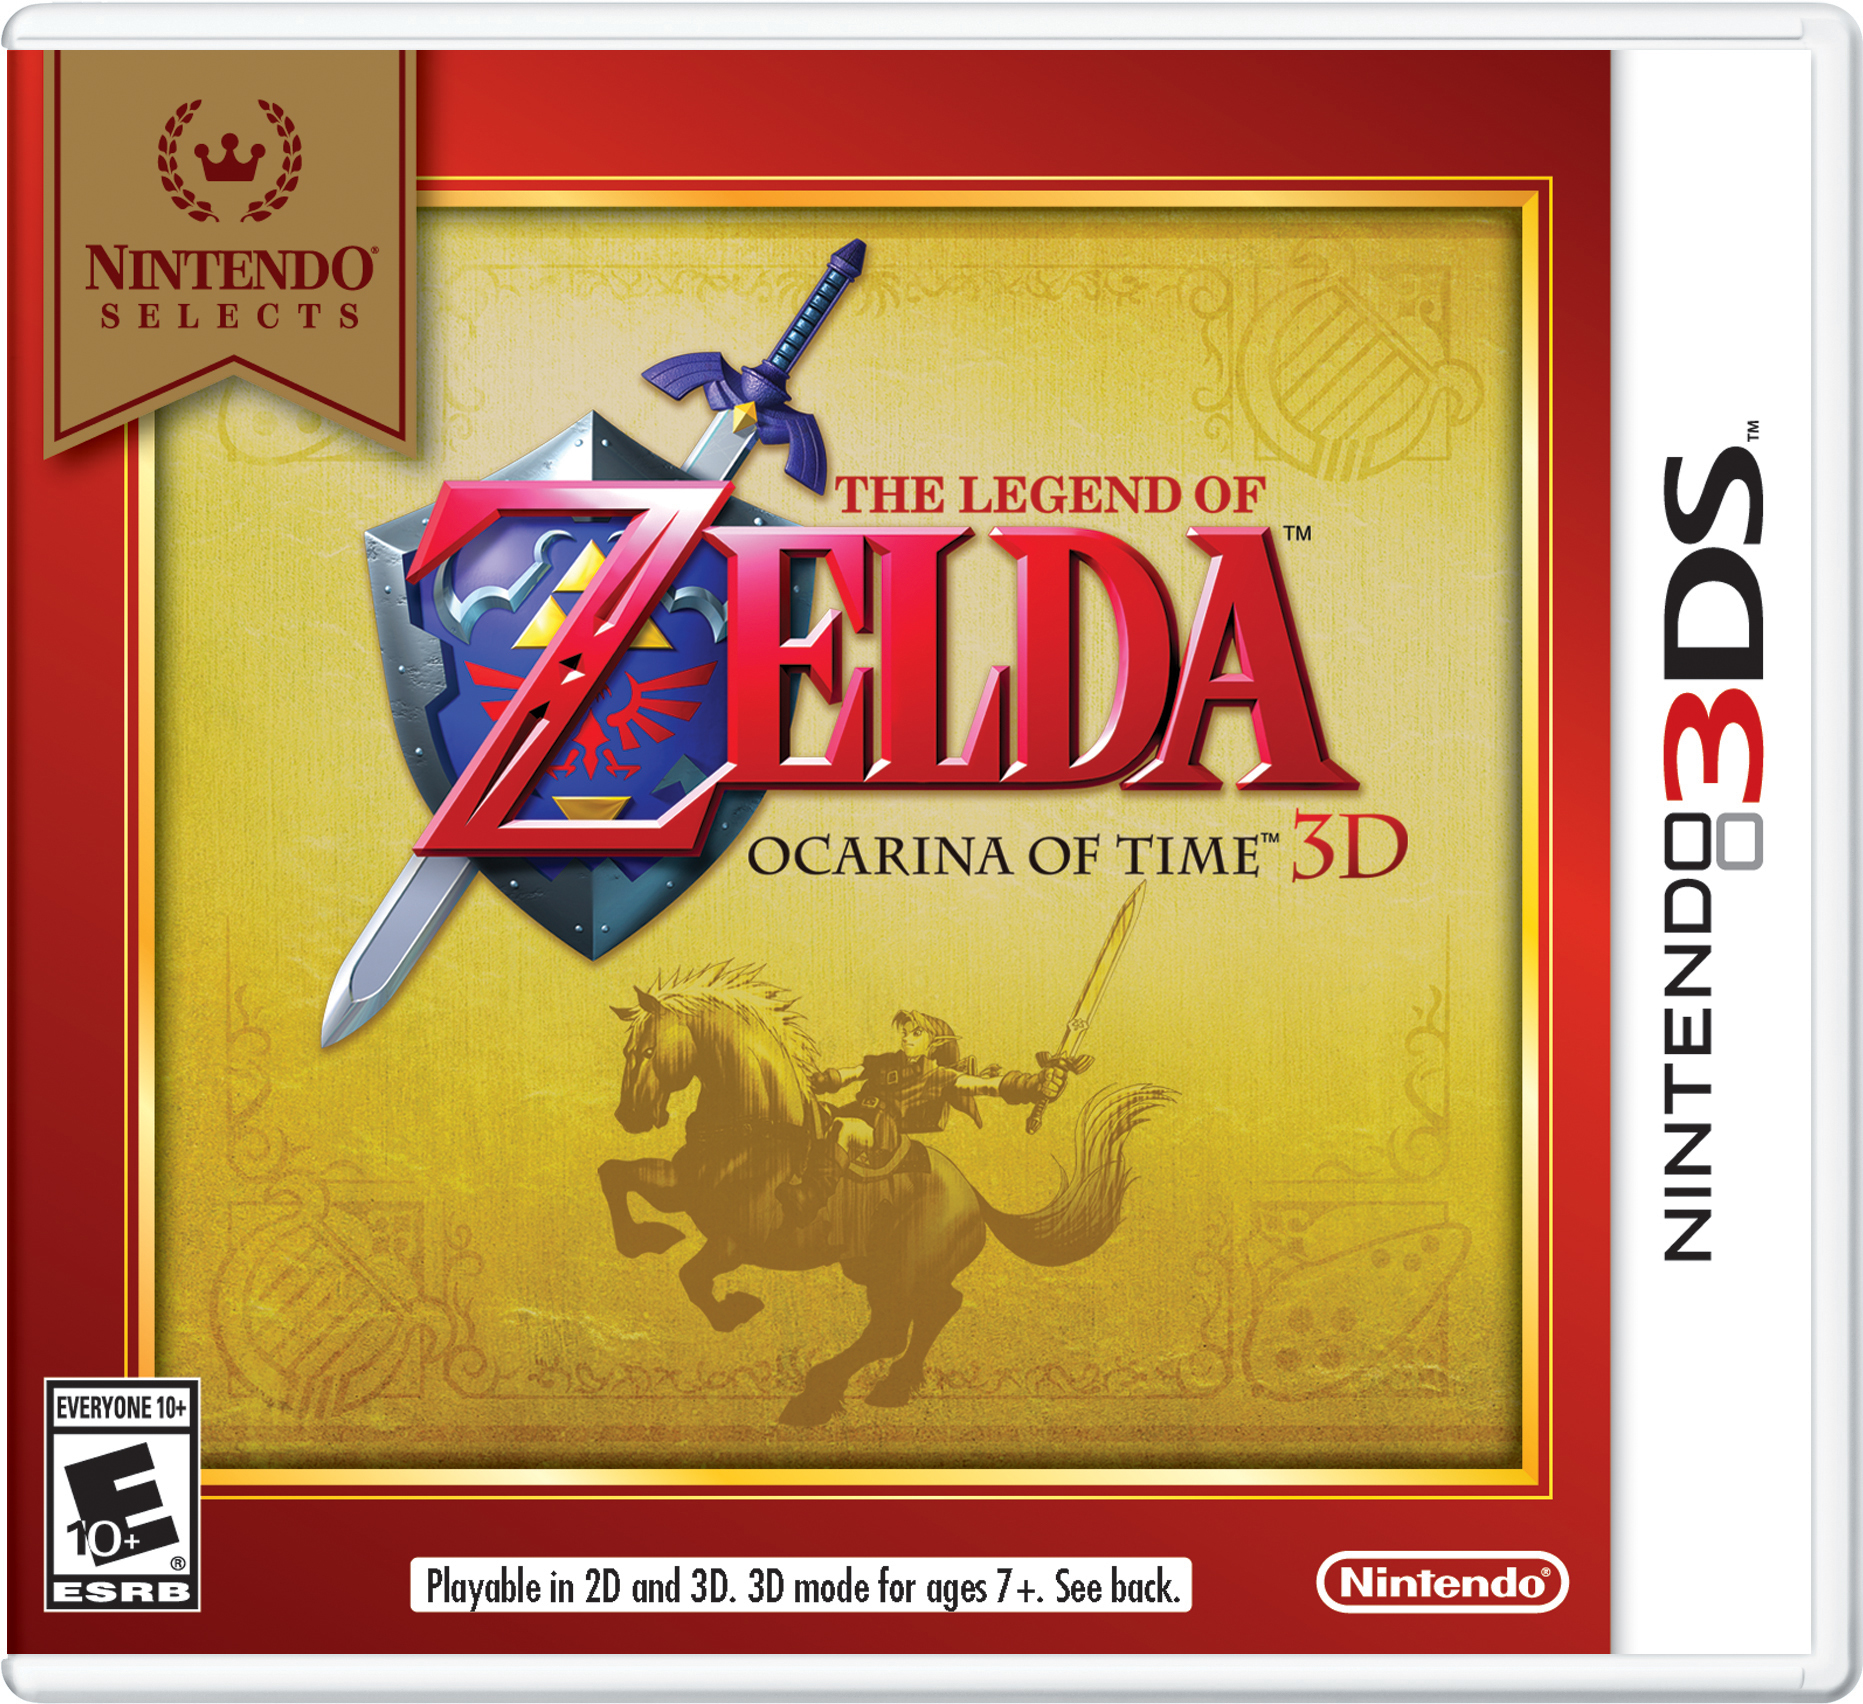 A Link Between Worlds Joins Nintendo Selects Line of Games, Available for  $19.99 on February 5th - Zelda Dungeon